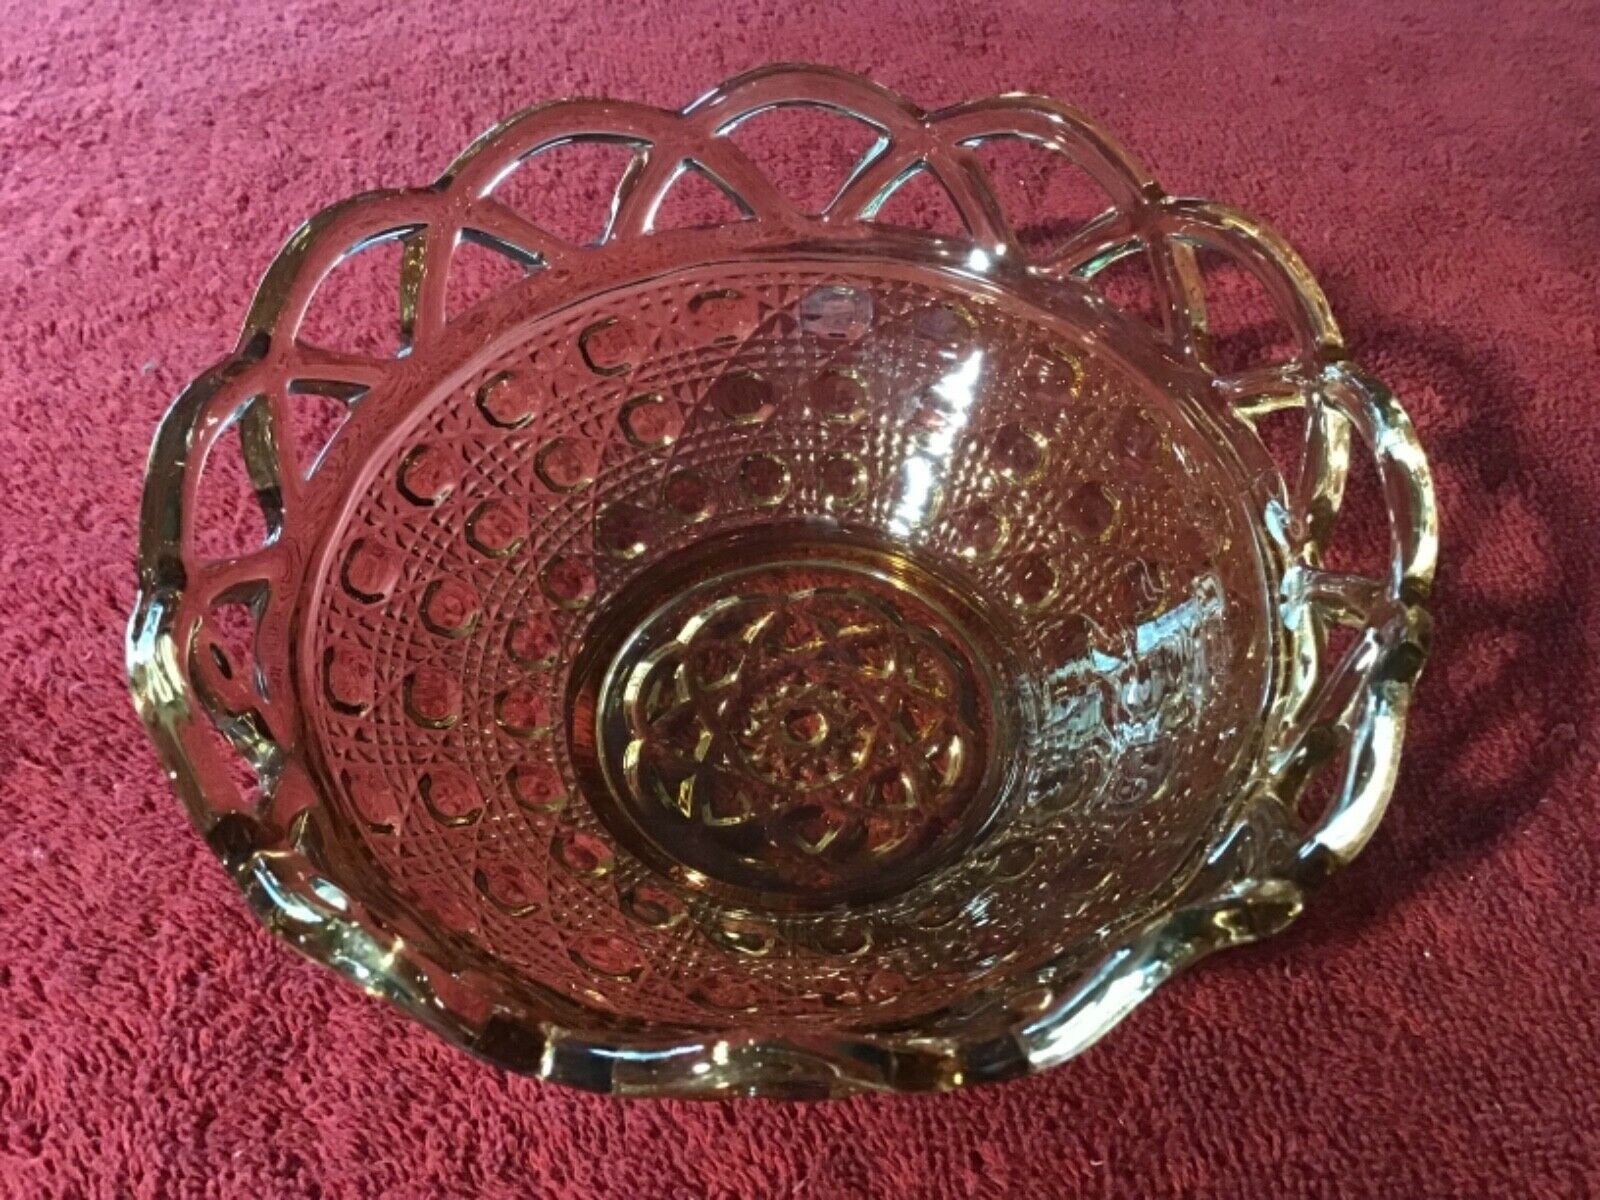 Vintage Embossed Amber Glass Bowl: Open Lace Edge: 5.5” Diameter